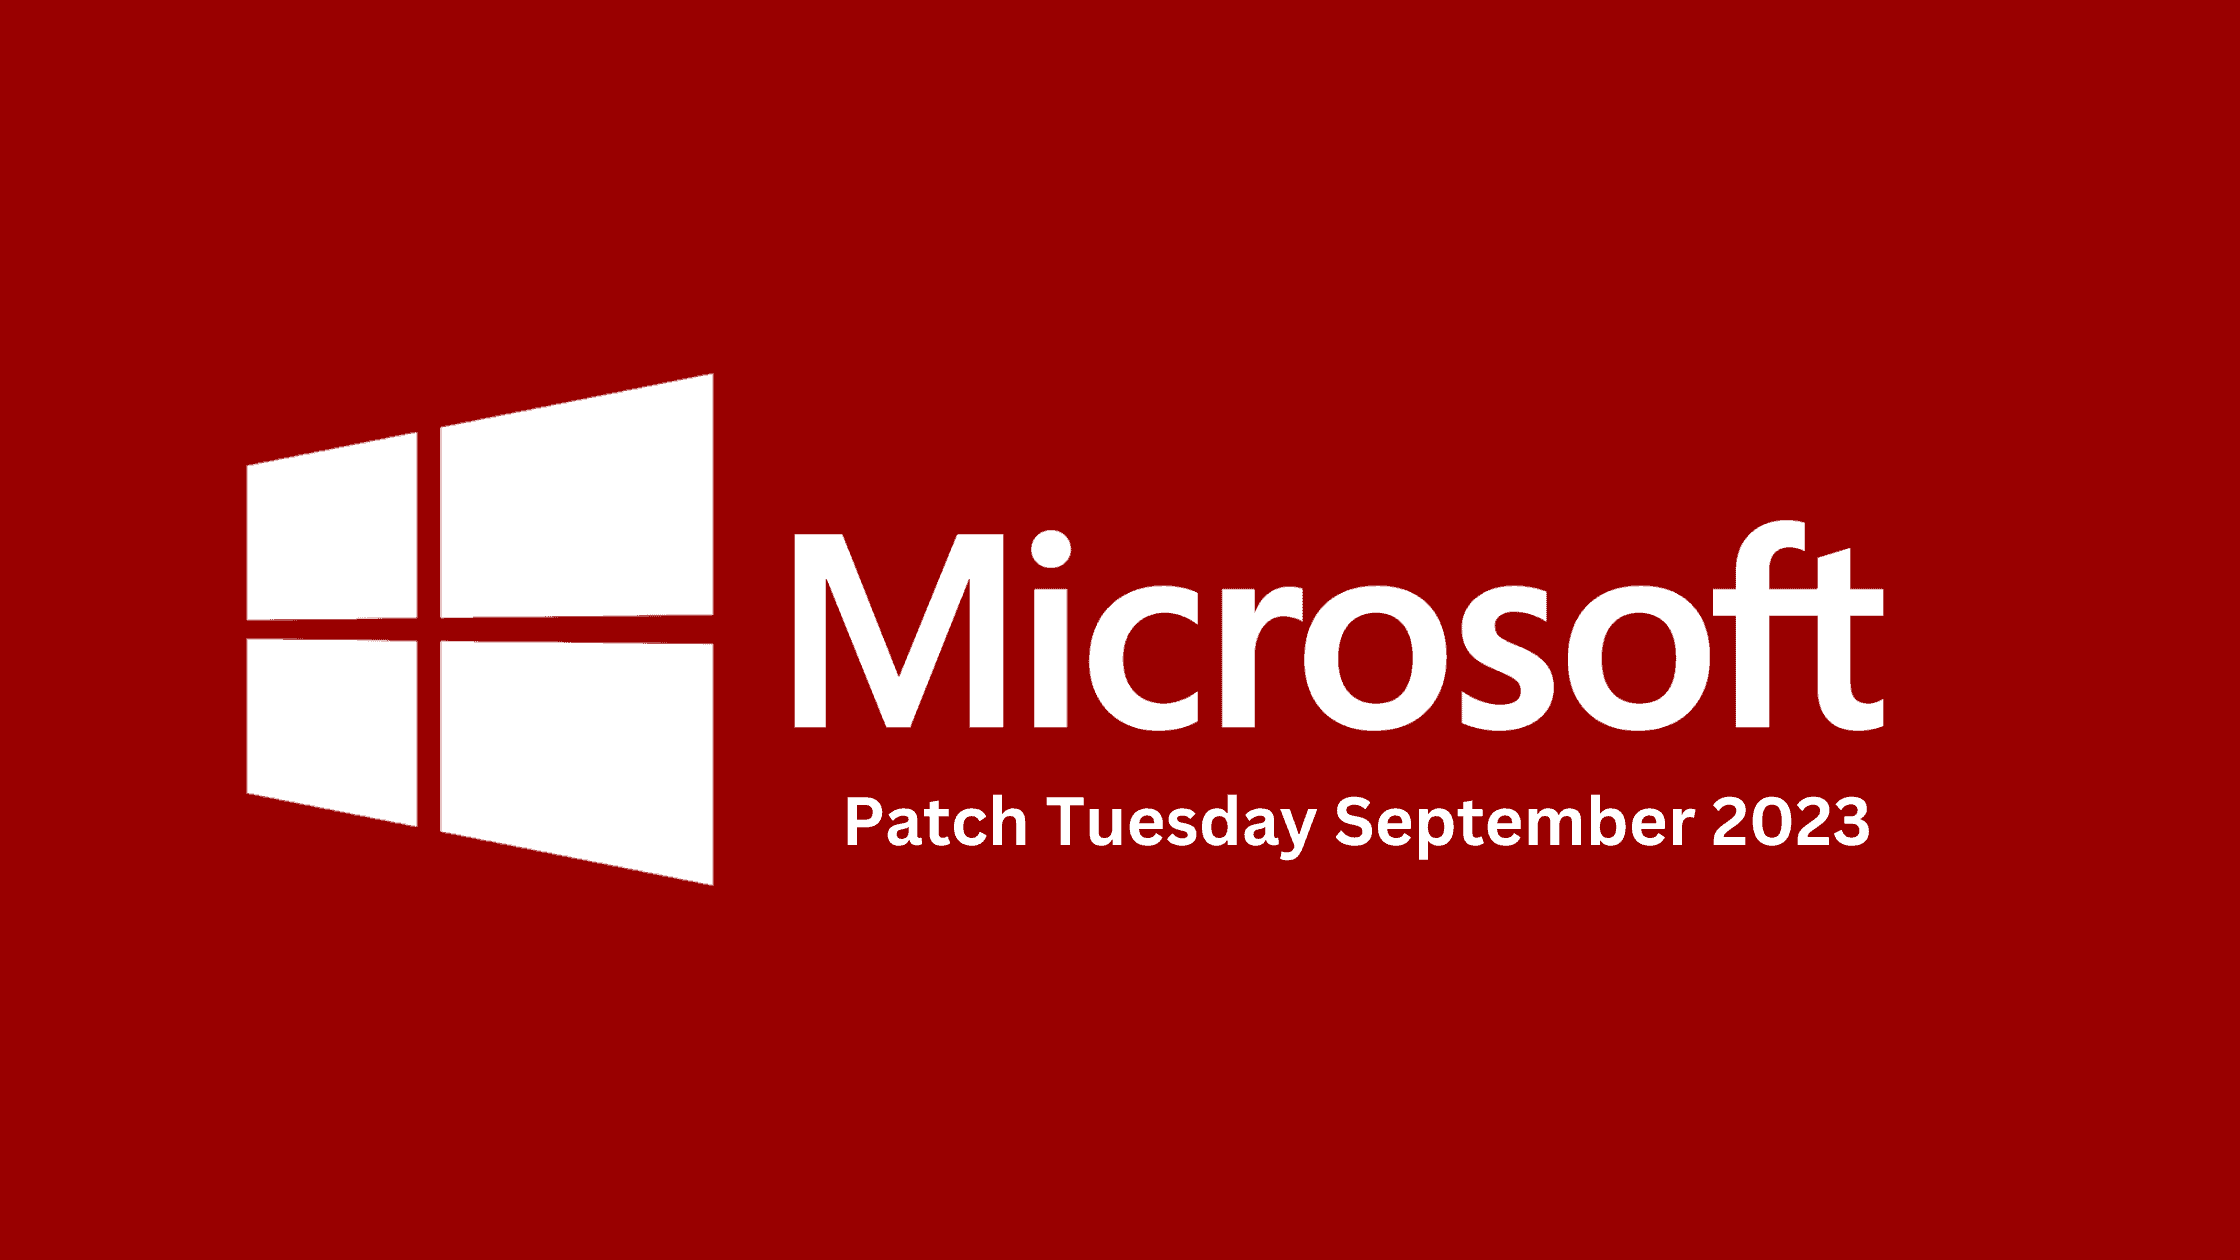 Breaking Down The Latest September 2023 Patch Tuesday Report